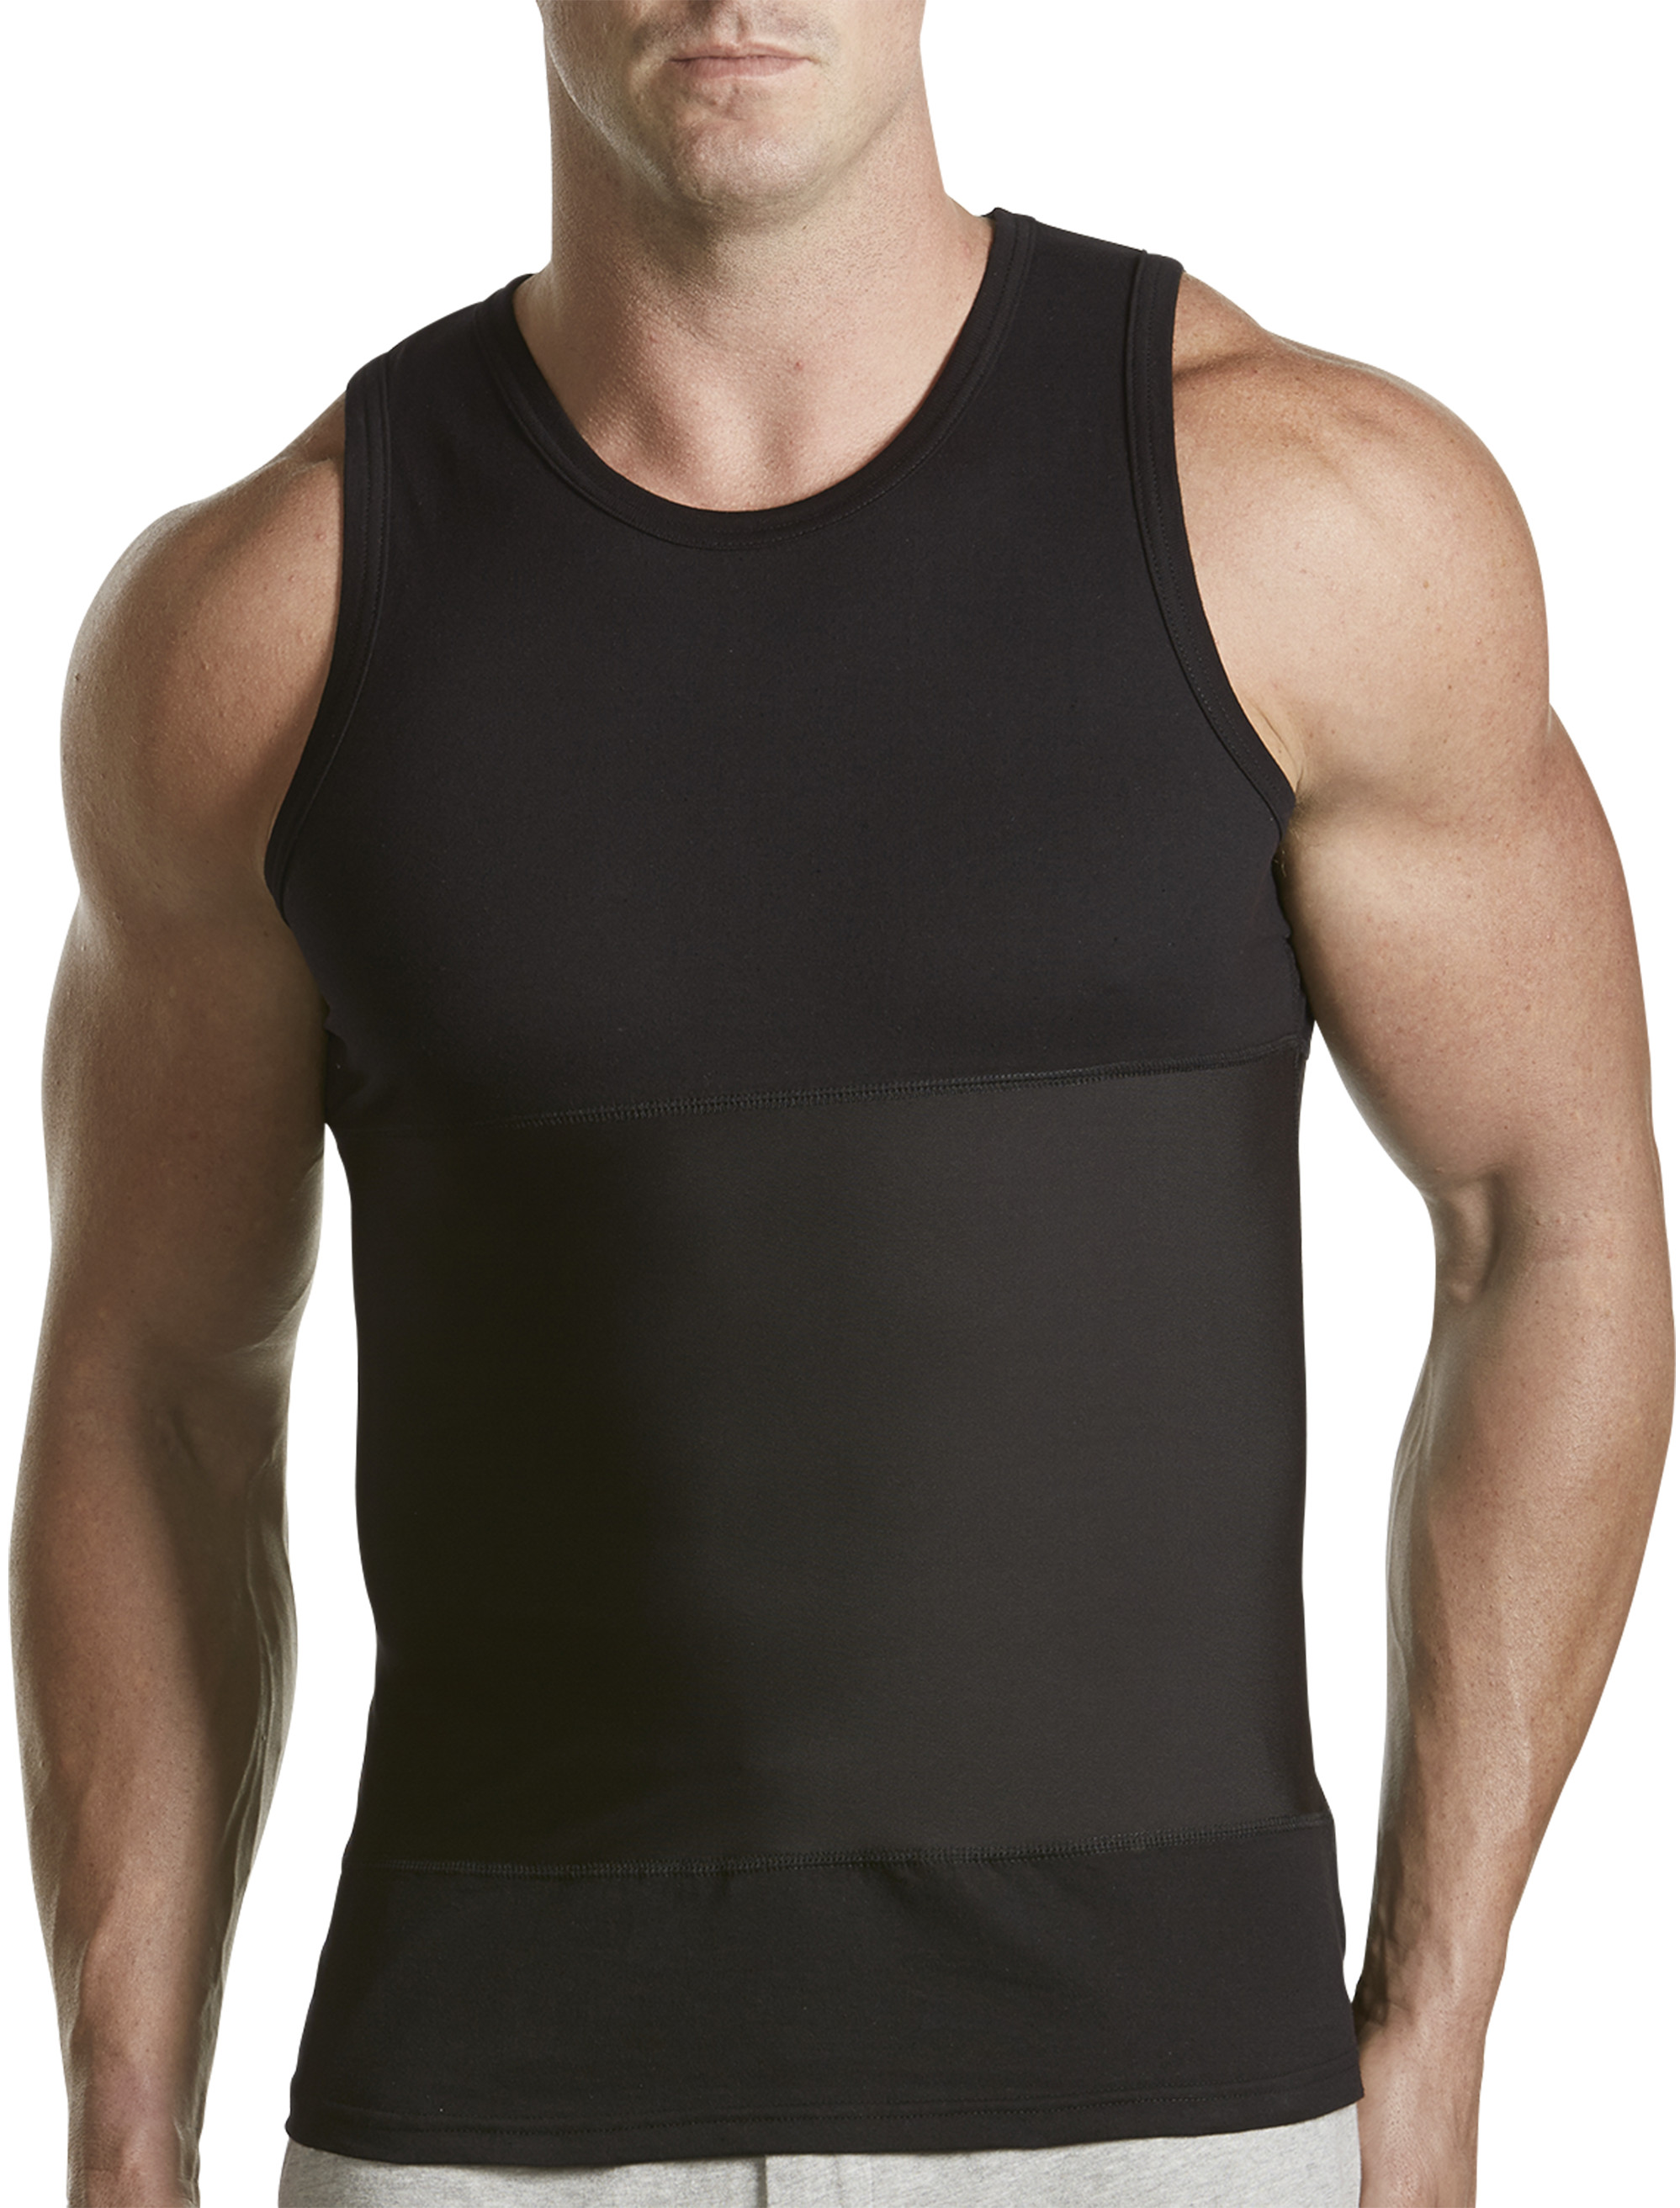 Mens Compression Tank Tops Body Slimming Shaper Shirt Muscle